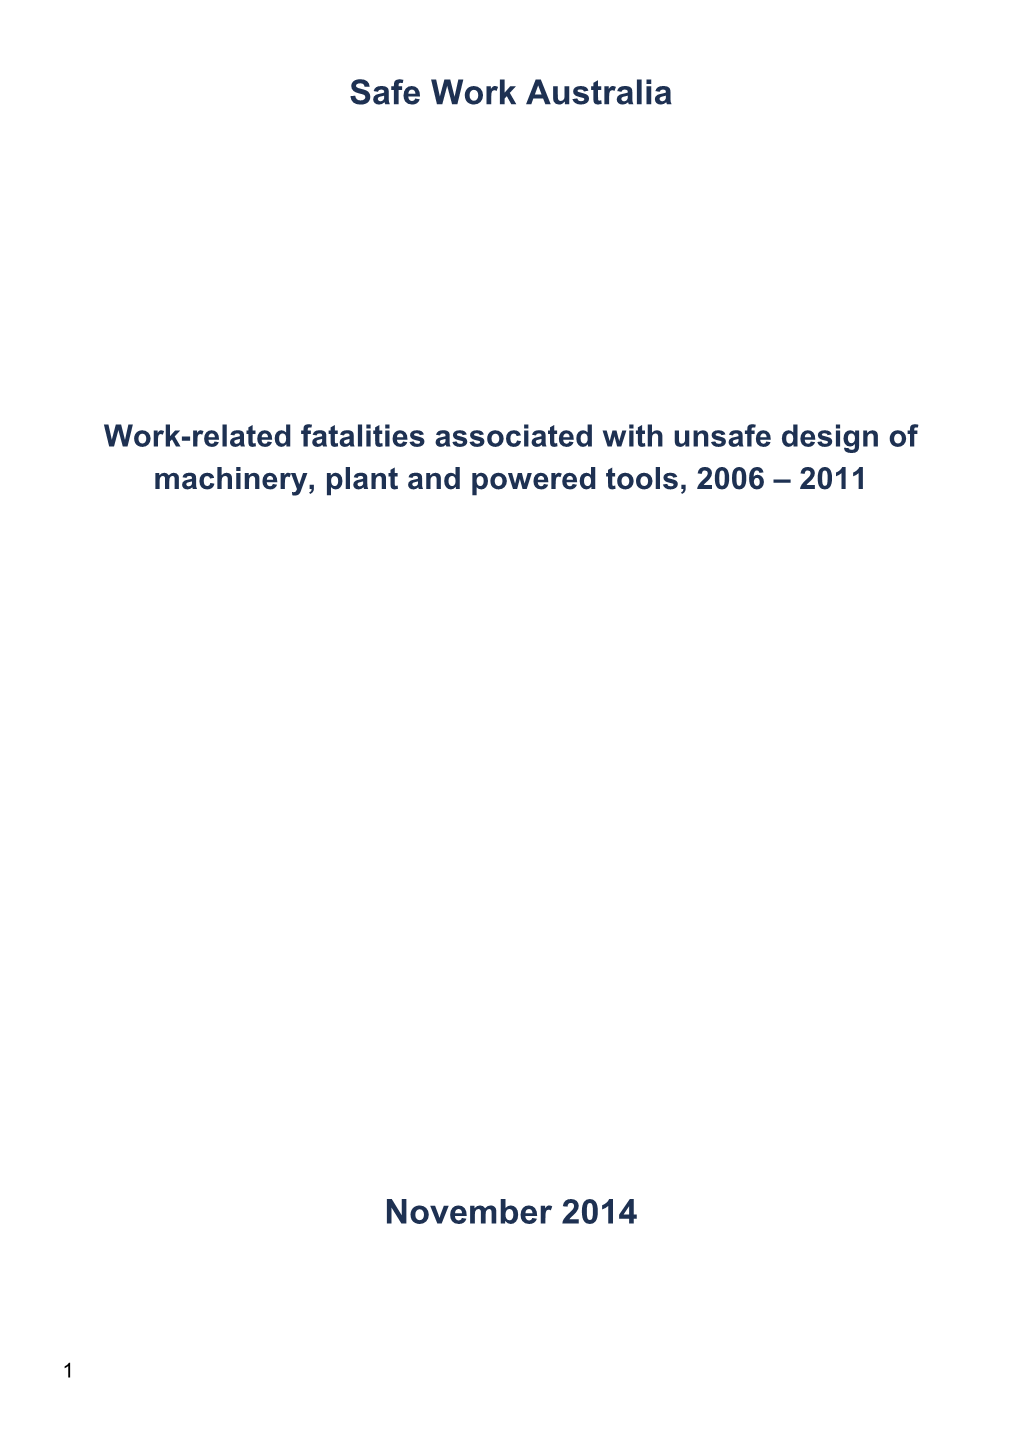 Work-Related Fatalities Associated with Unsafe Design of Machinery, Plant and Powered Tools